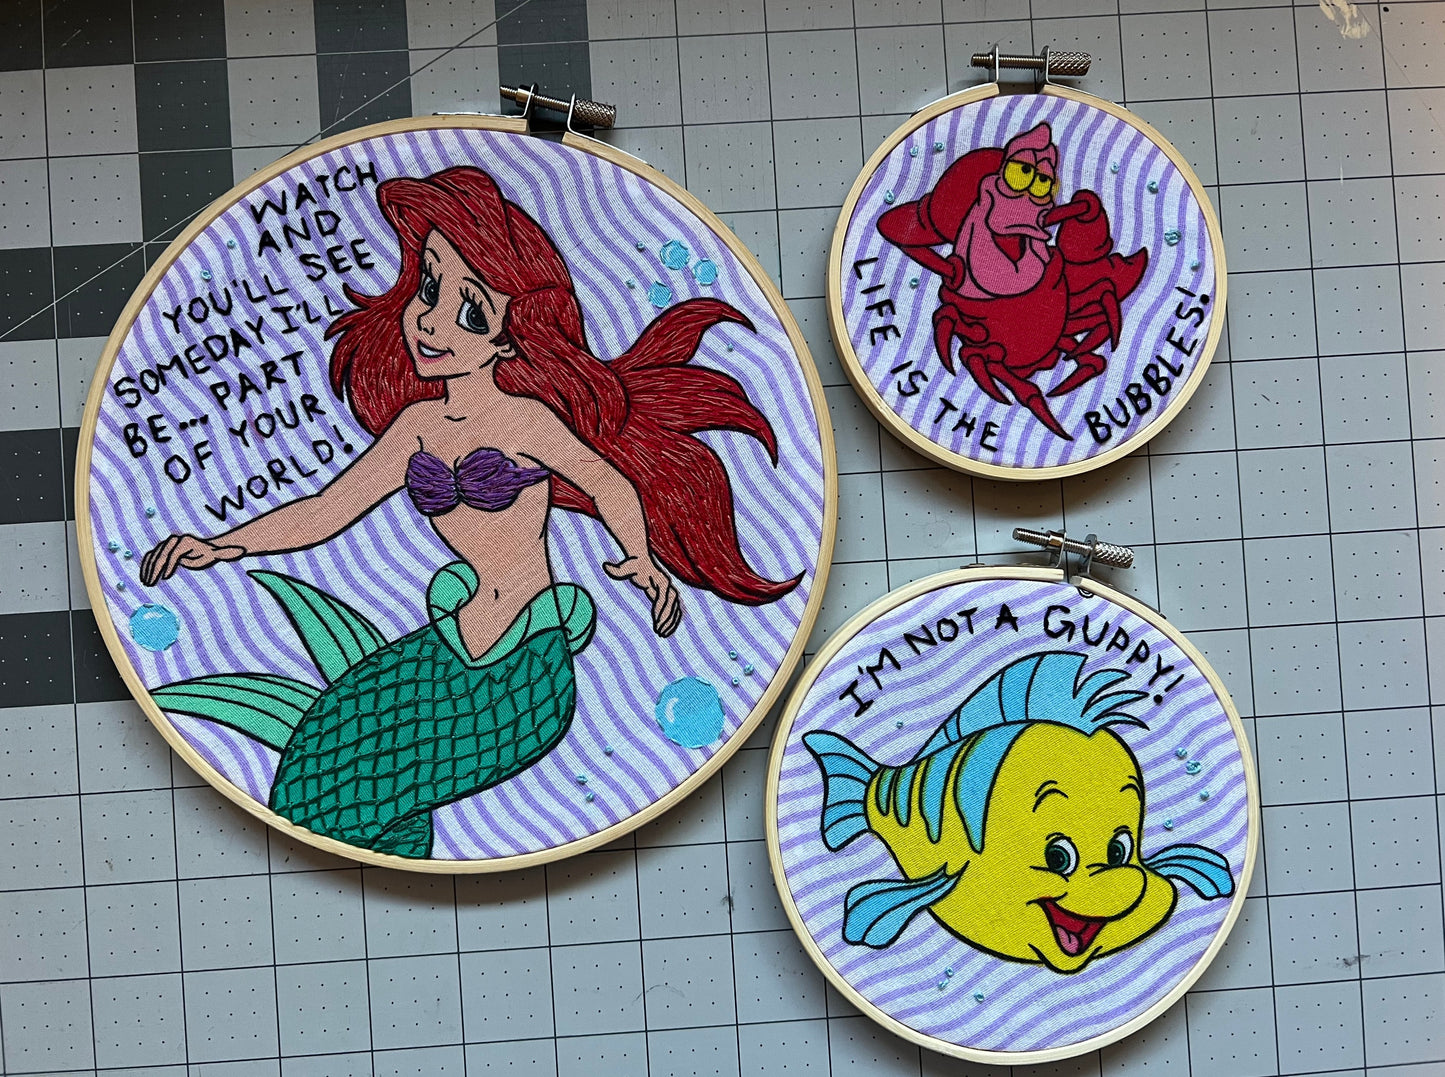 All three hoops from a vintage The Little Mermaid sheet, with quotes embroidered around the characters